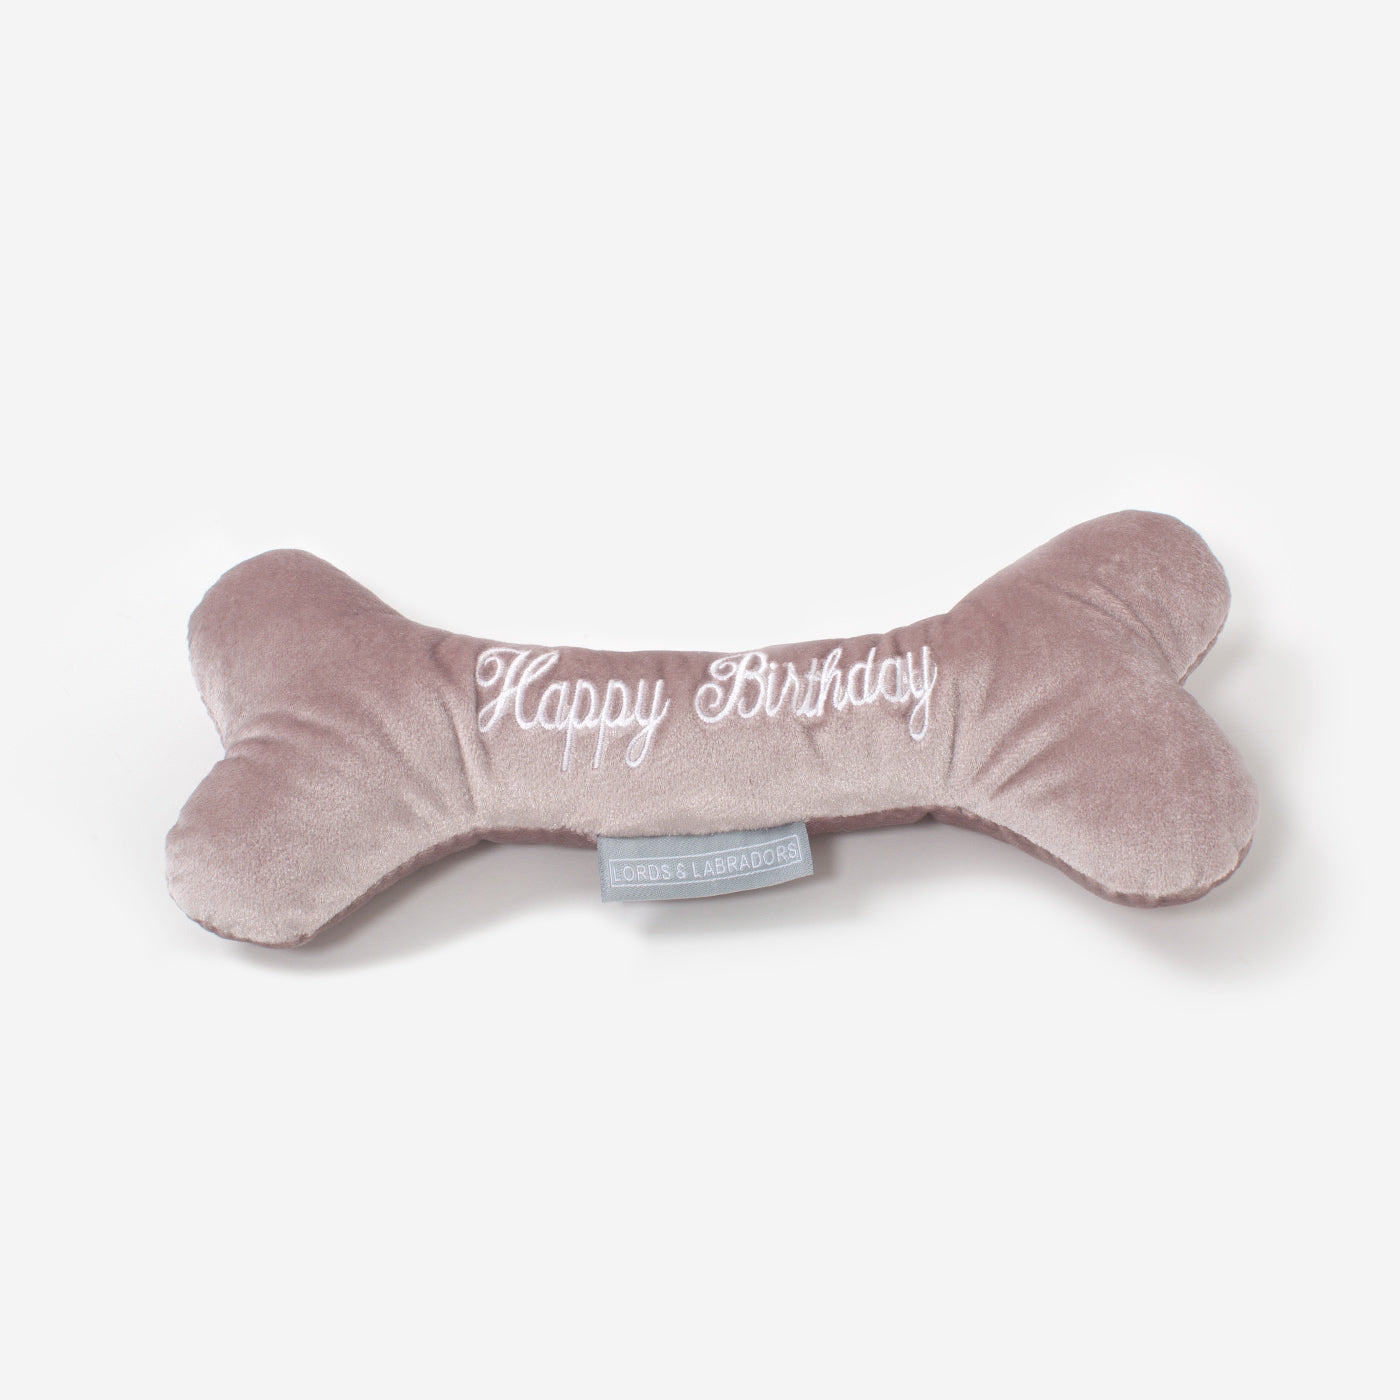 [color:rose gold velvet] Present The Perfect Pet Playtime With Our Luxury 'Happy Birthday' Dog Bone Toy, In Stunning Rose Gold Velvet! Available Now at Lords & Labradors US